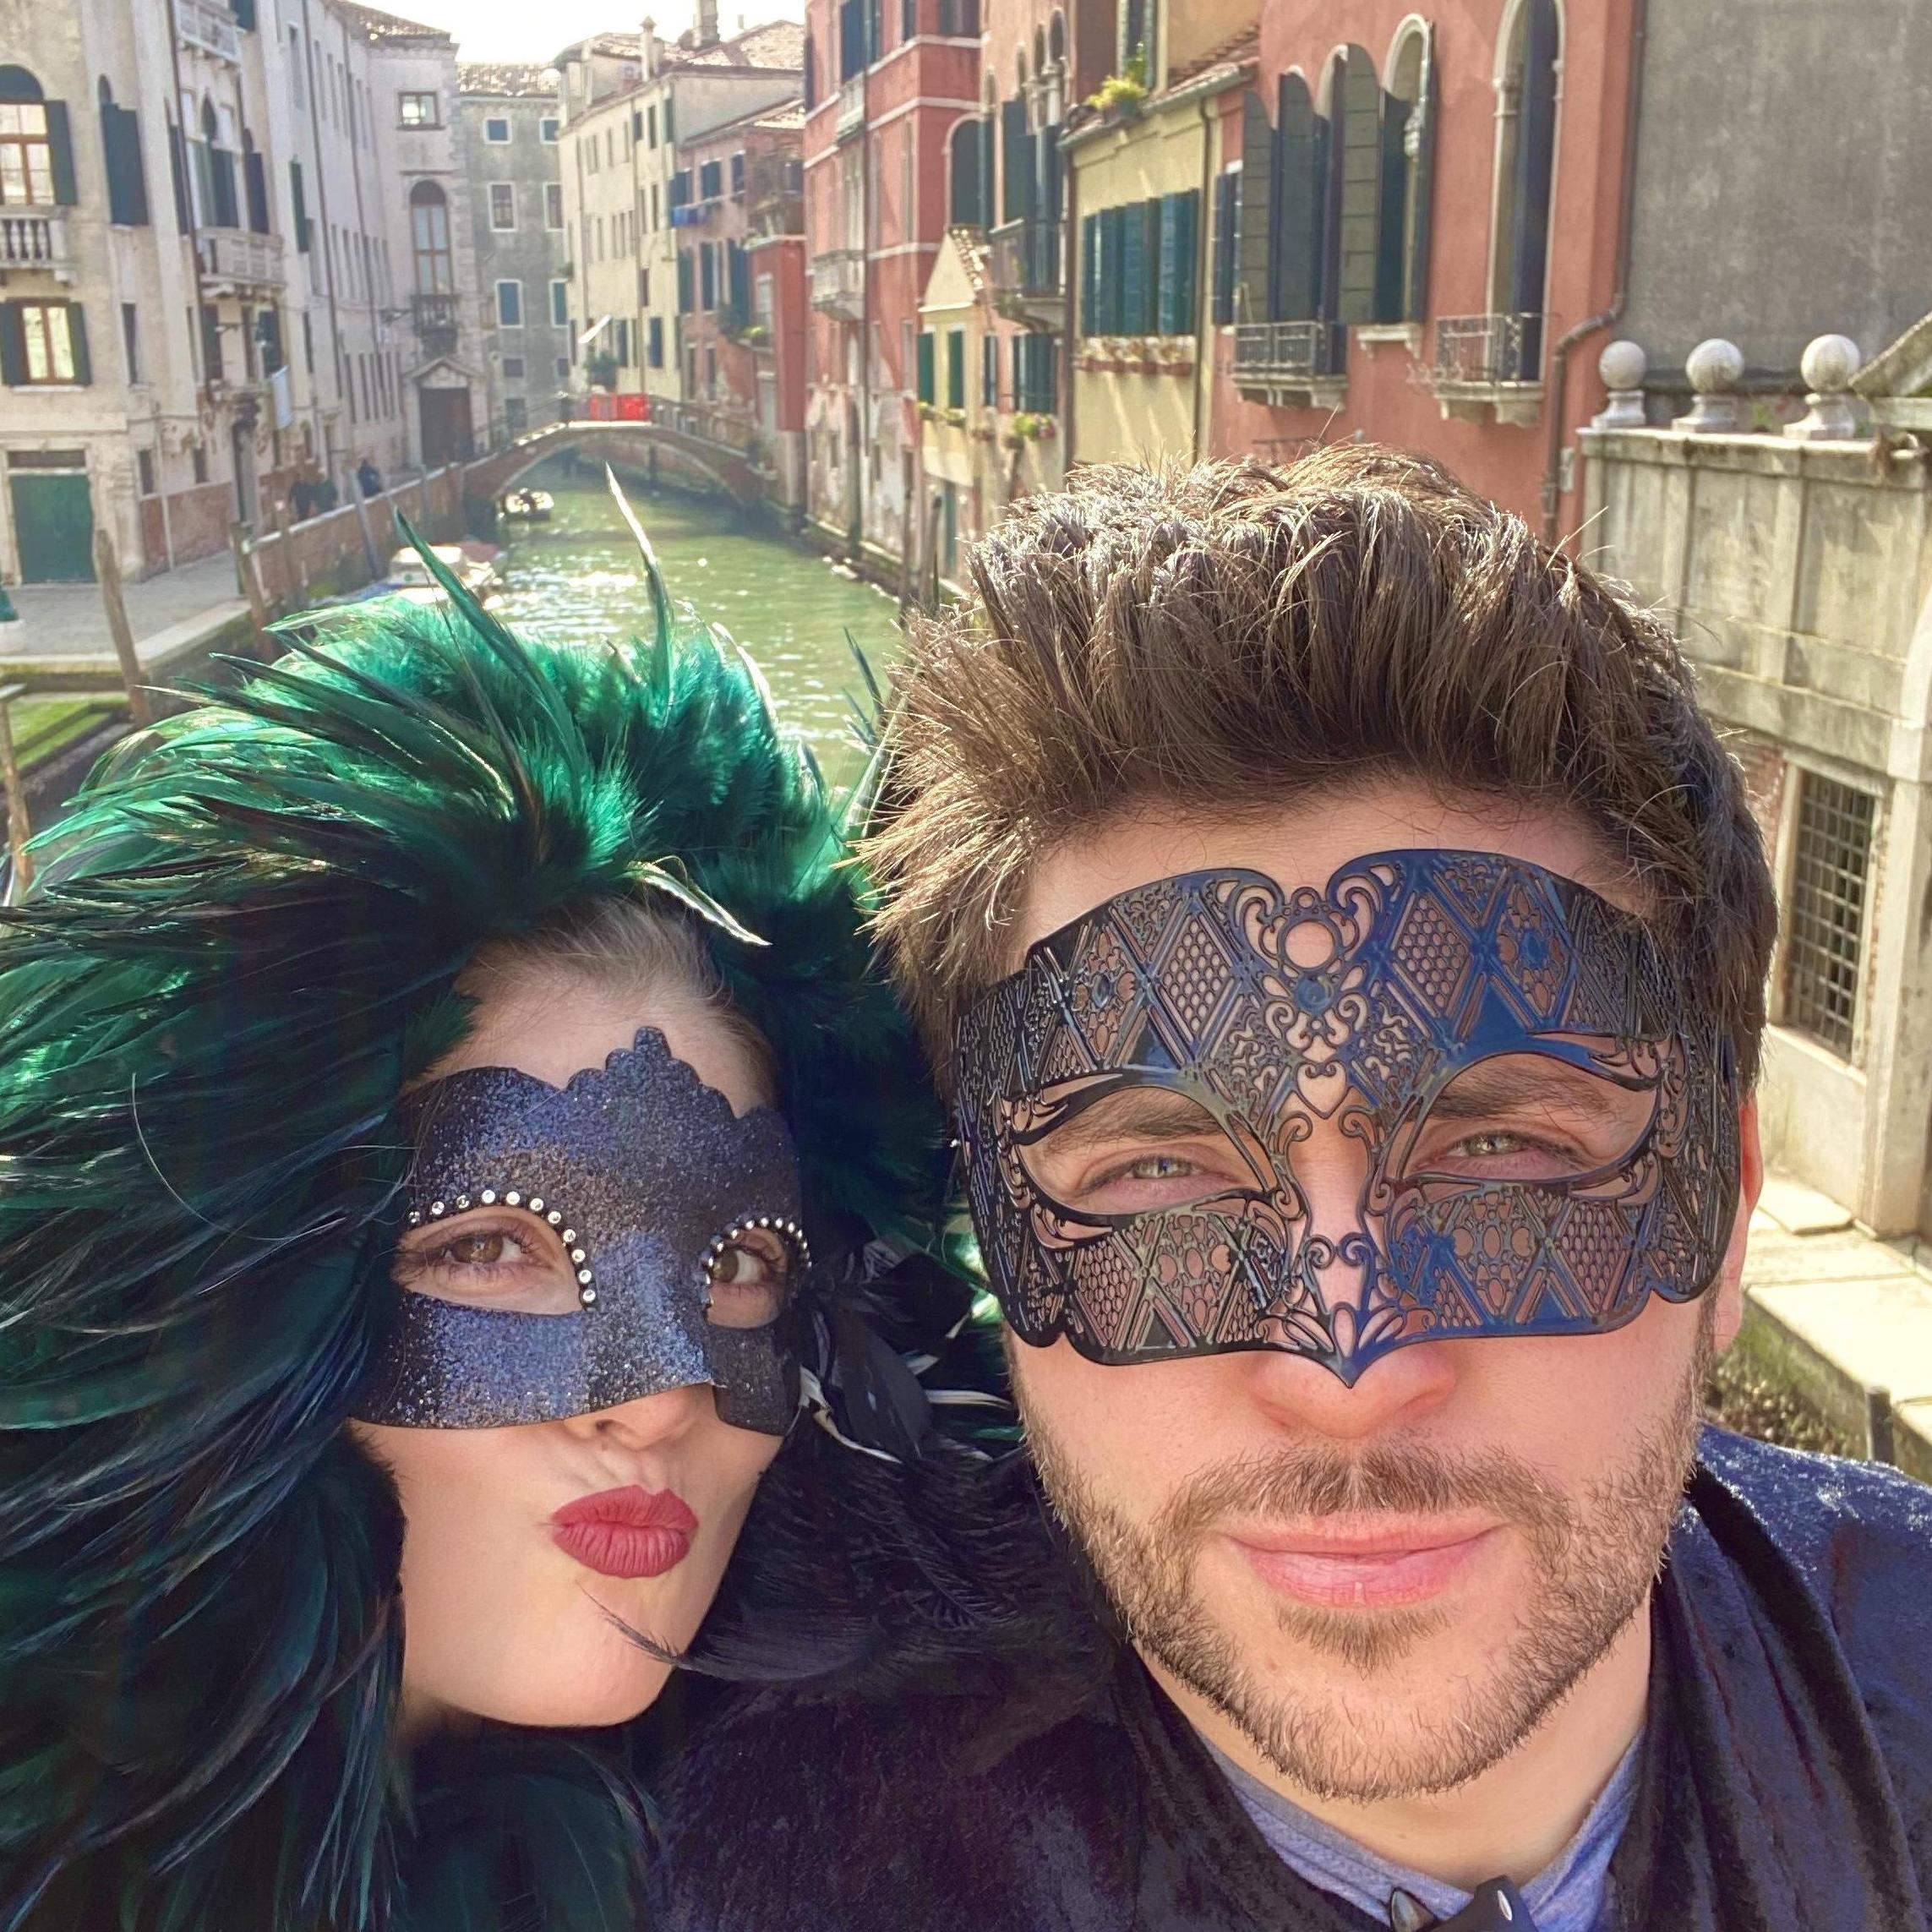 Enjoying the tradition of dressing up with elaborate masks during Venice's Carnival
2020